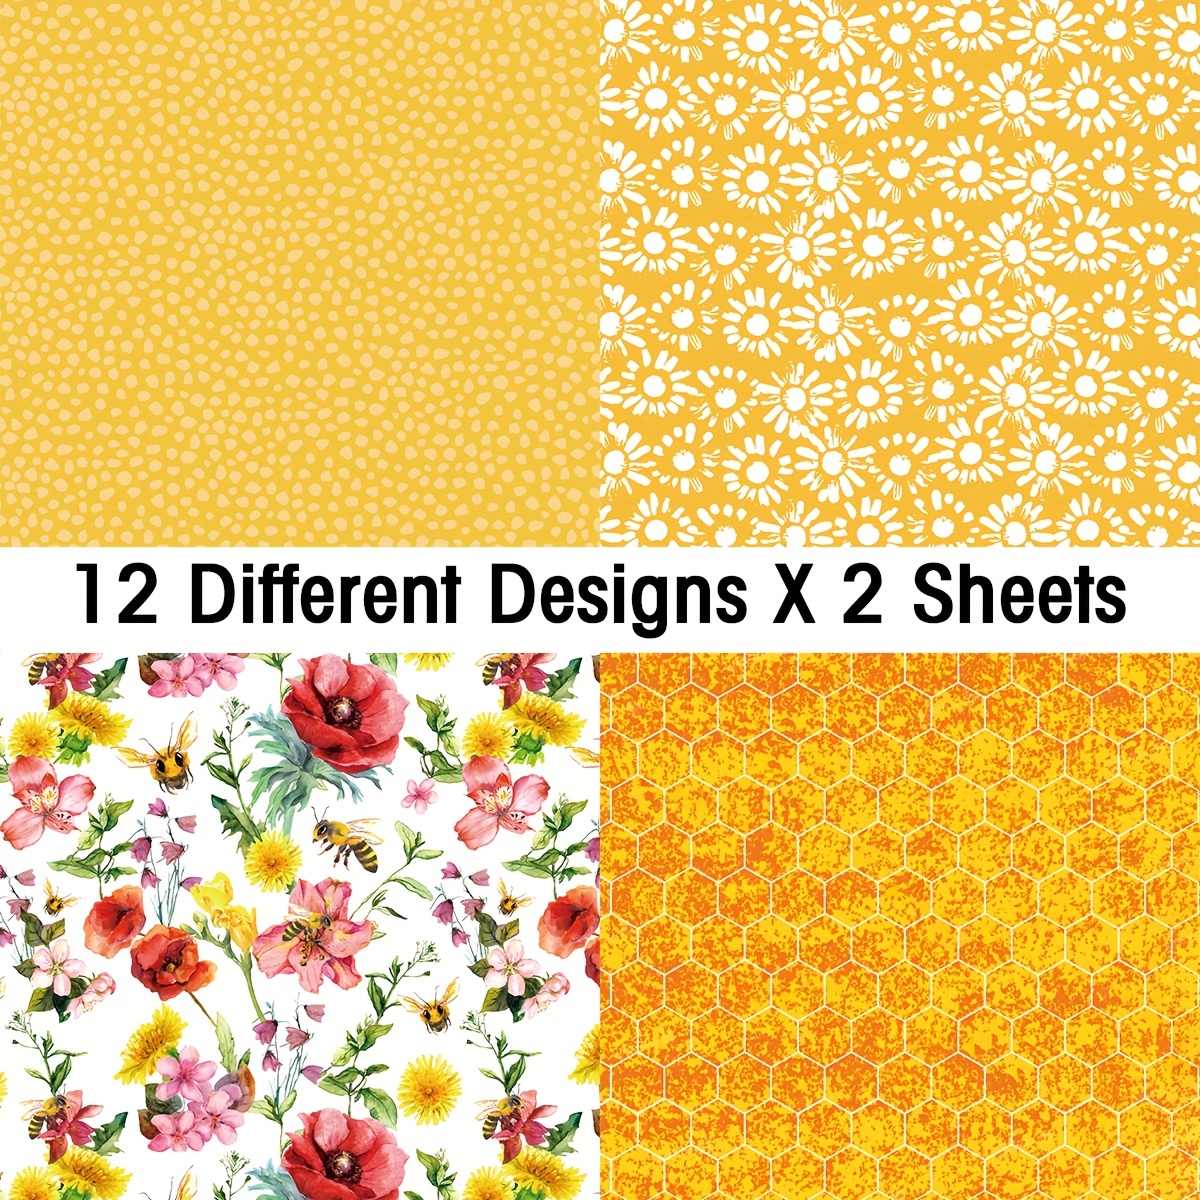 24pcs Bee & Flower Pattern Stickers For Scrapbooking, Diy Crafts,  Journaling, Gift Wrapping, Photo Album, Decorating, Art Paper, Scrapbook  Accessories